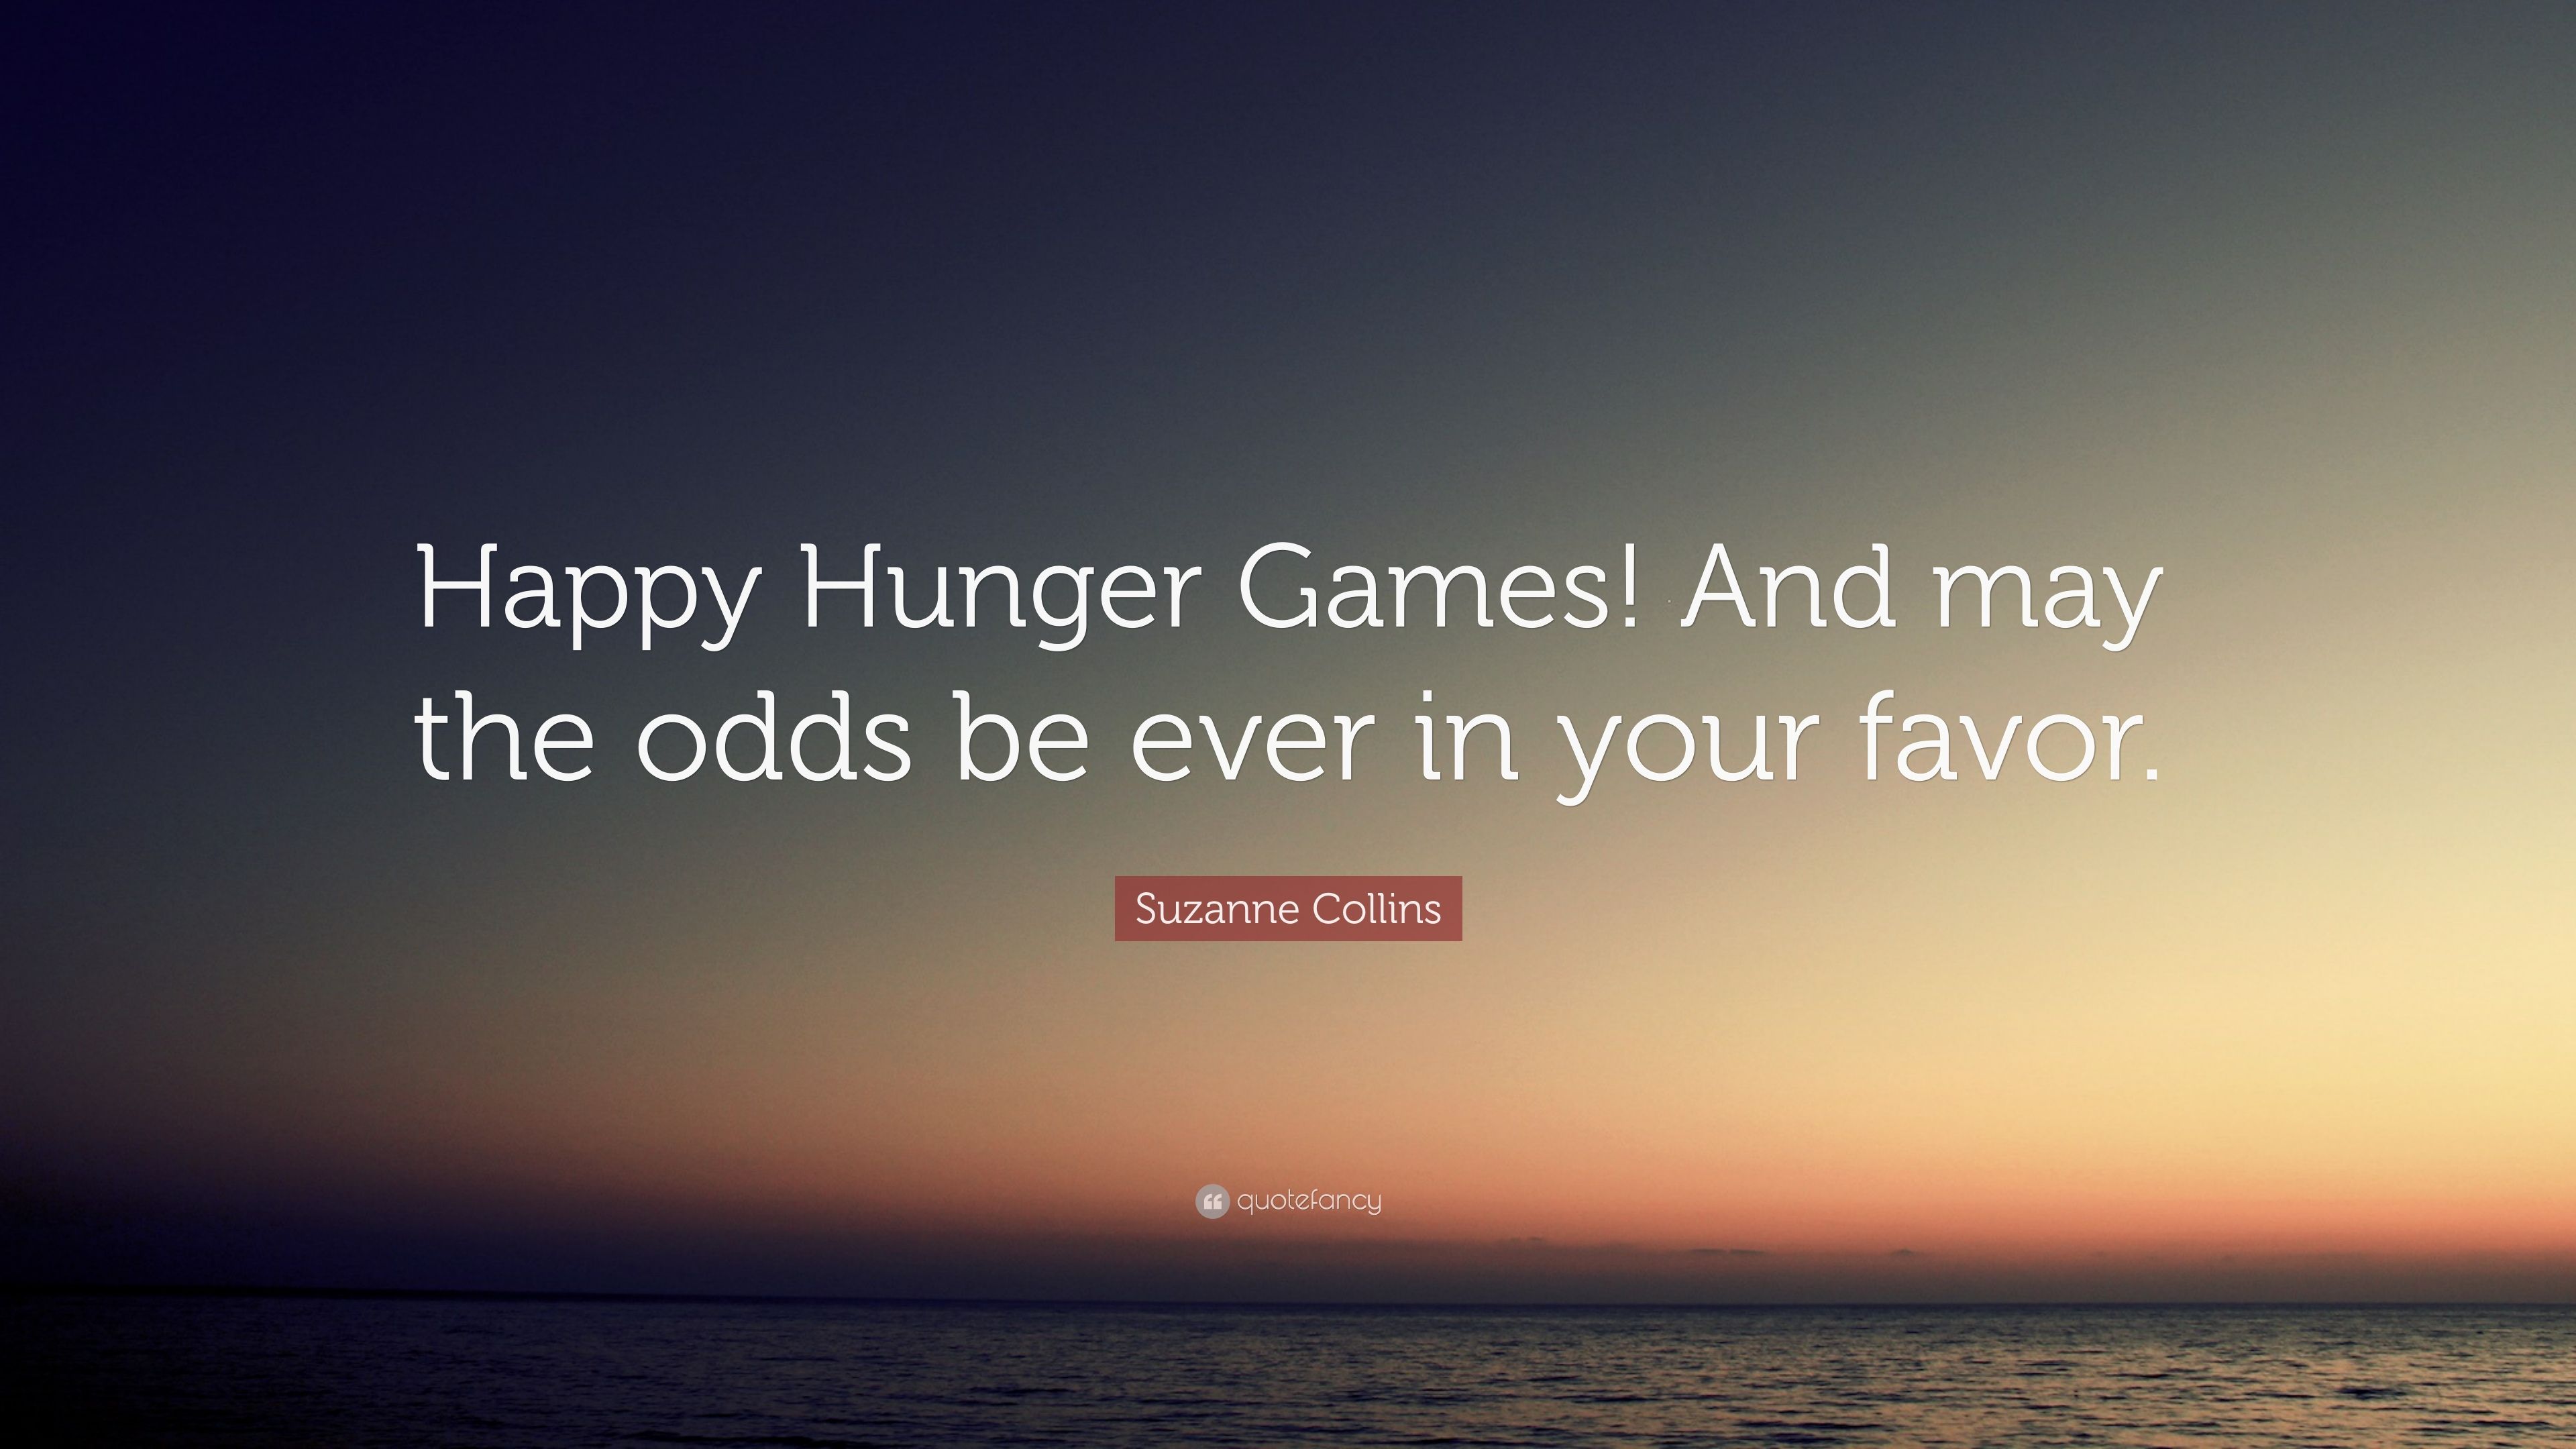 Suzanne Collins Quote: “Happy Hunger Games! And may the odds be ever in your favor.” (11 wallpaper)